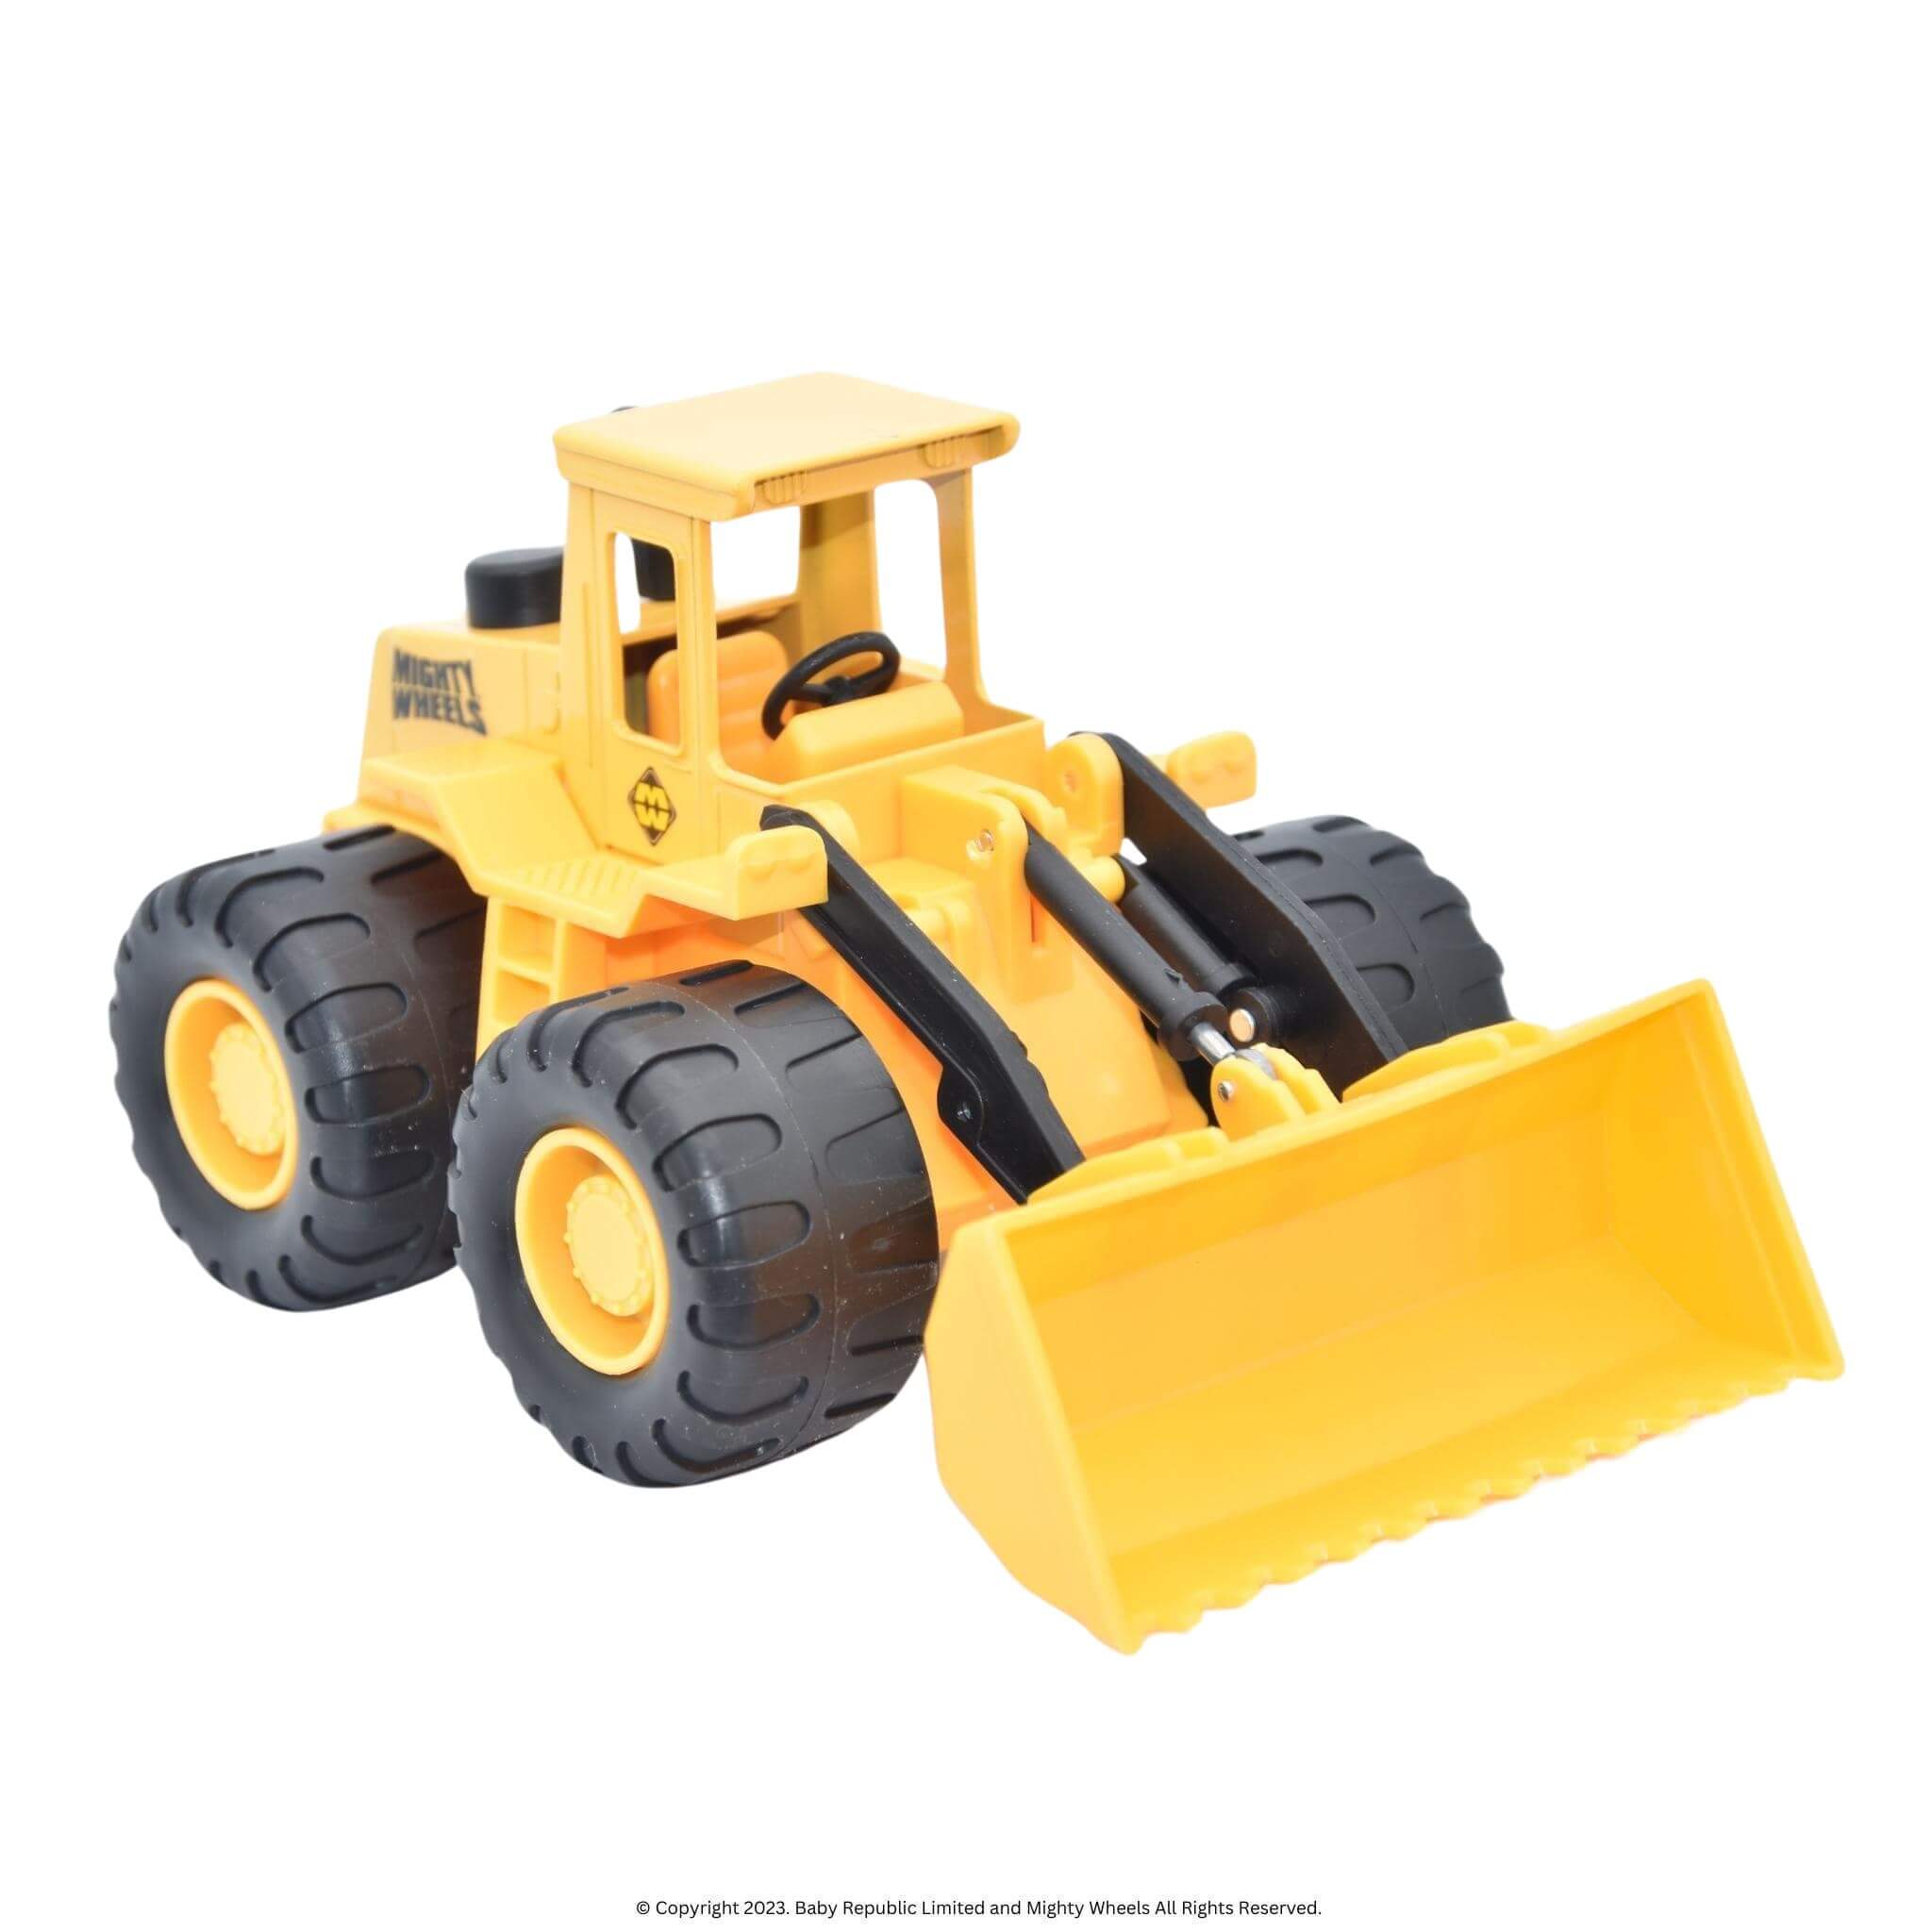 Mighty-Wheels-Front-Loader